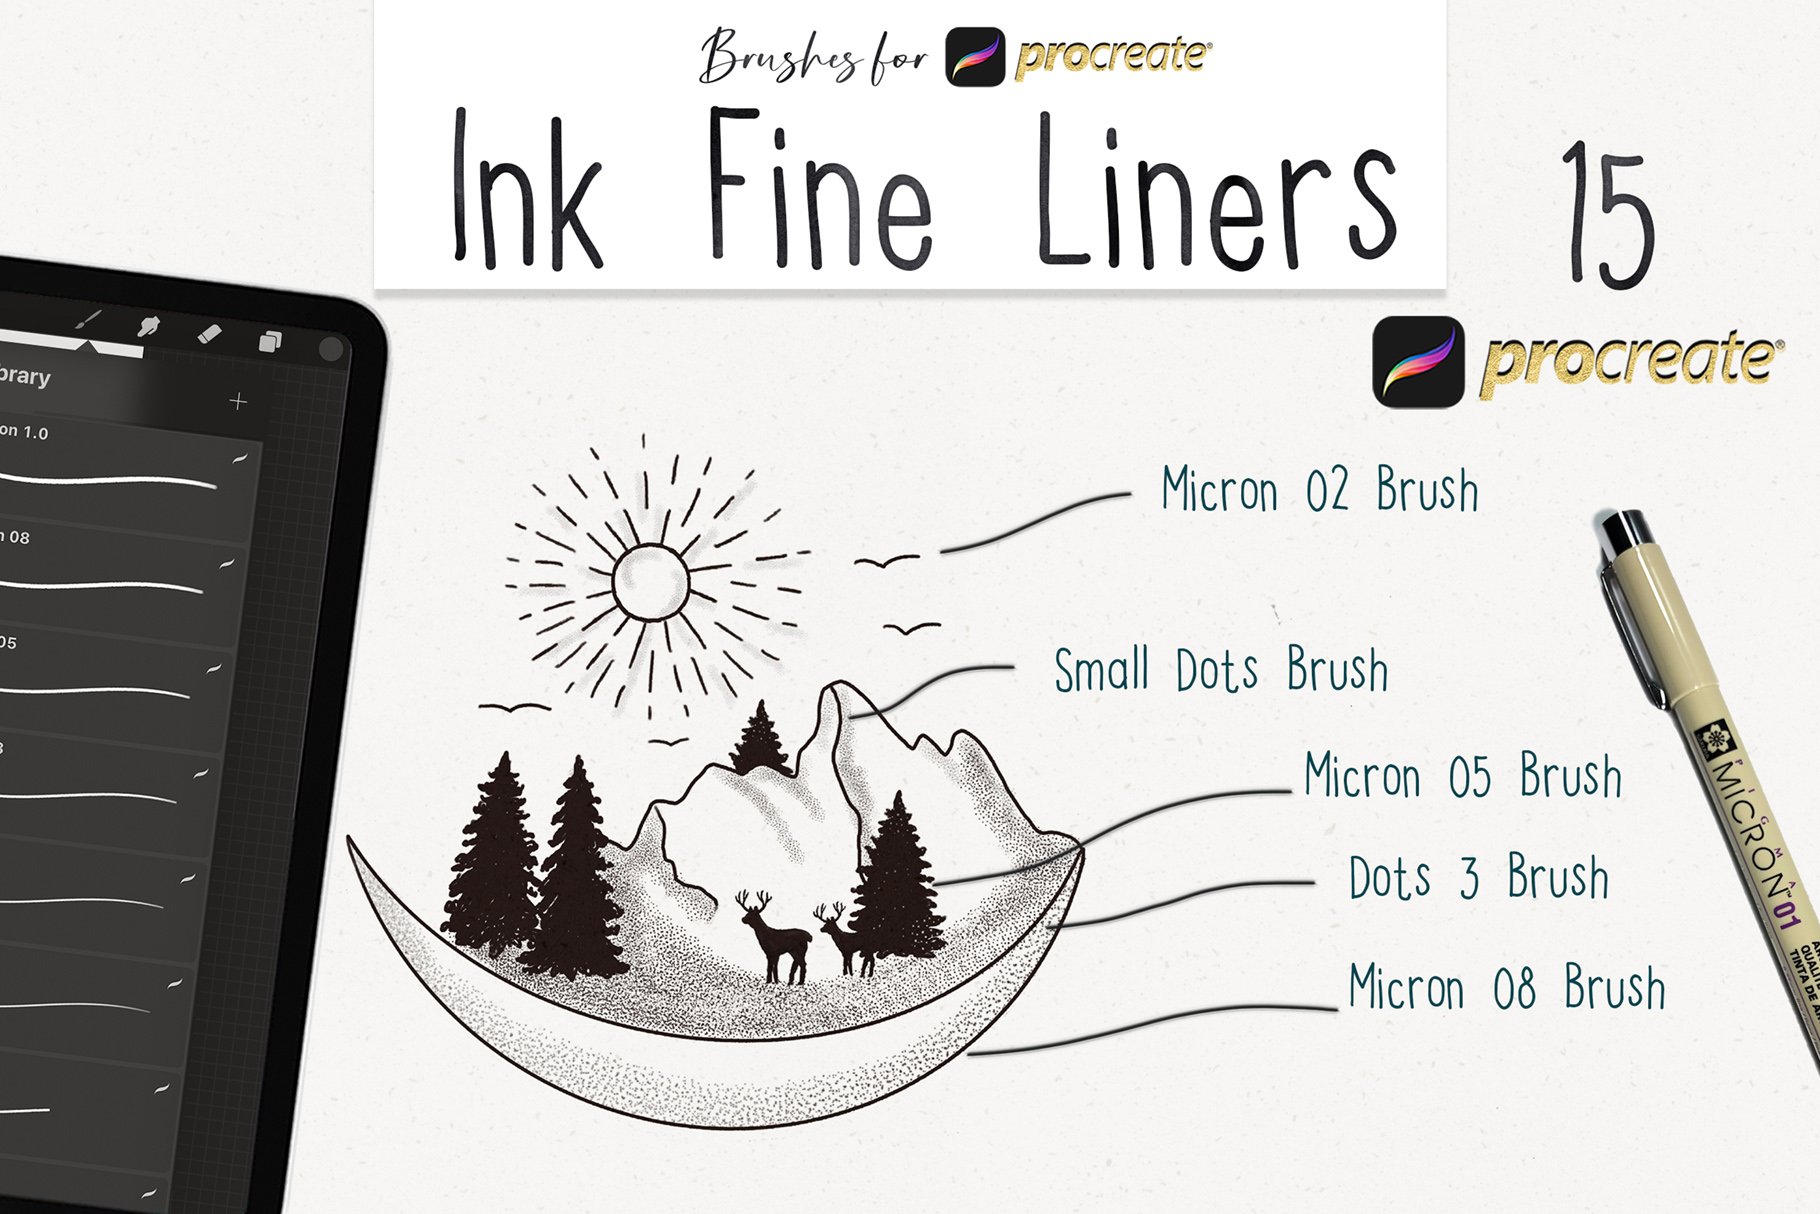 Fine Liners Brushes for Procreate Graphic by Disyukov · Creative